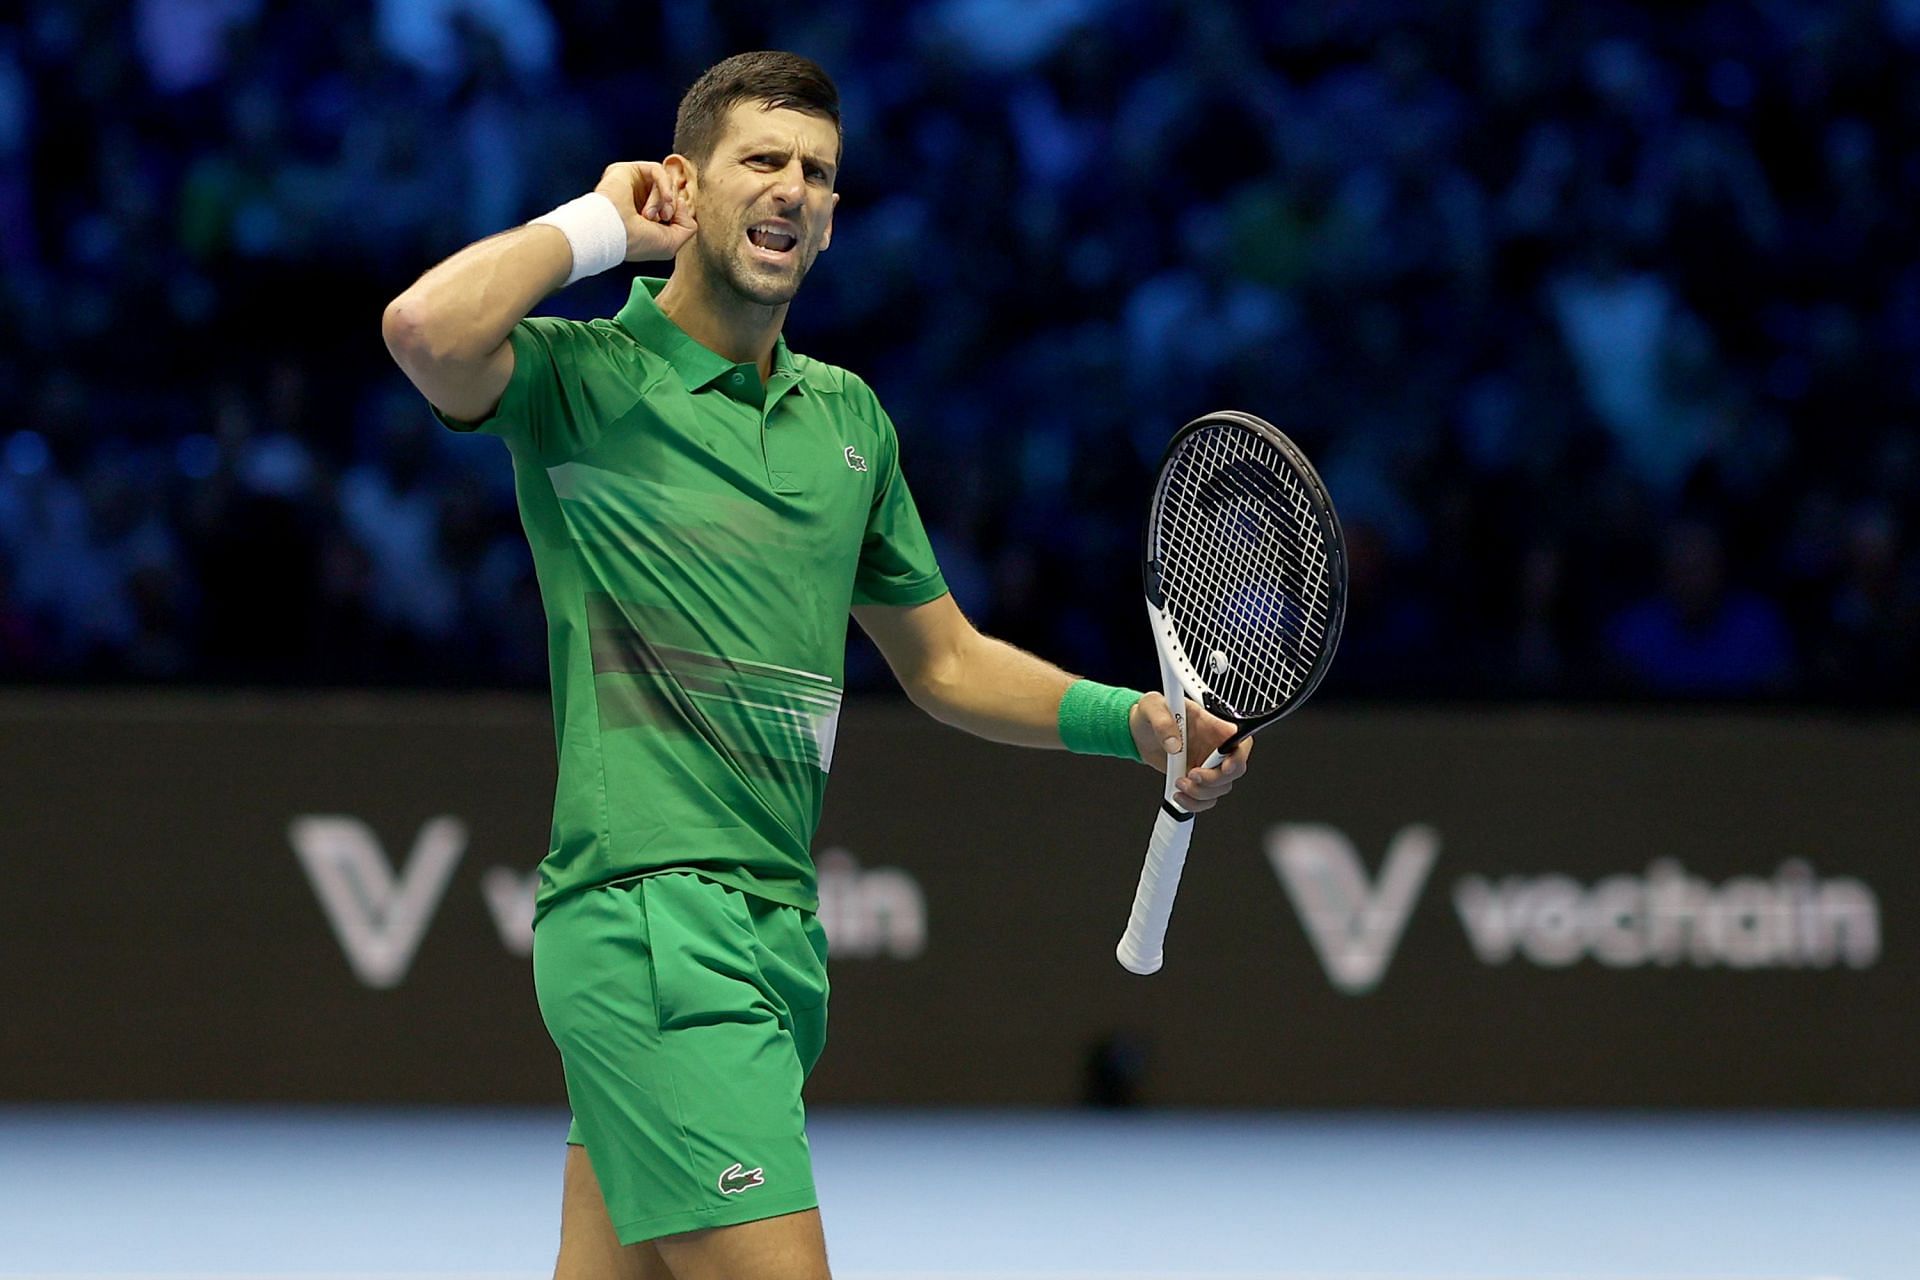 Novak Djokovic gestures to the crowd during his match against Stefanos Tsitsipas at the 2022 ATP Finals.